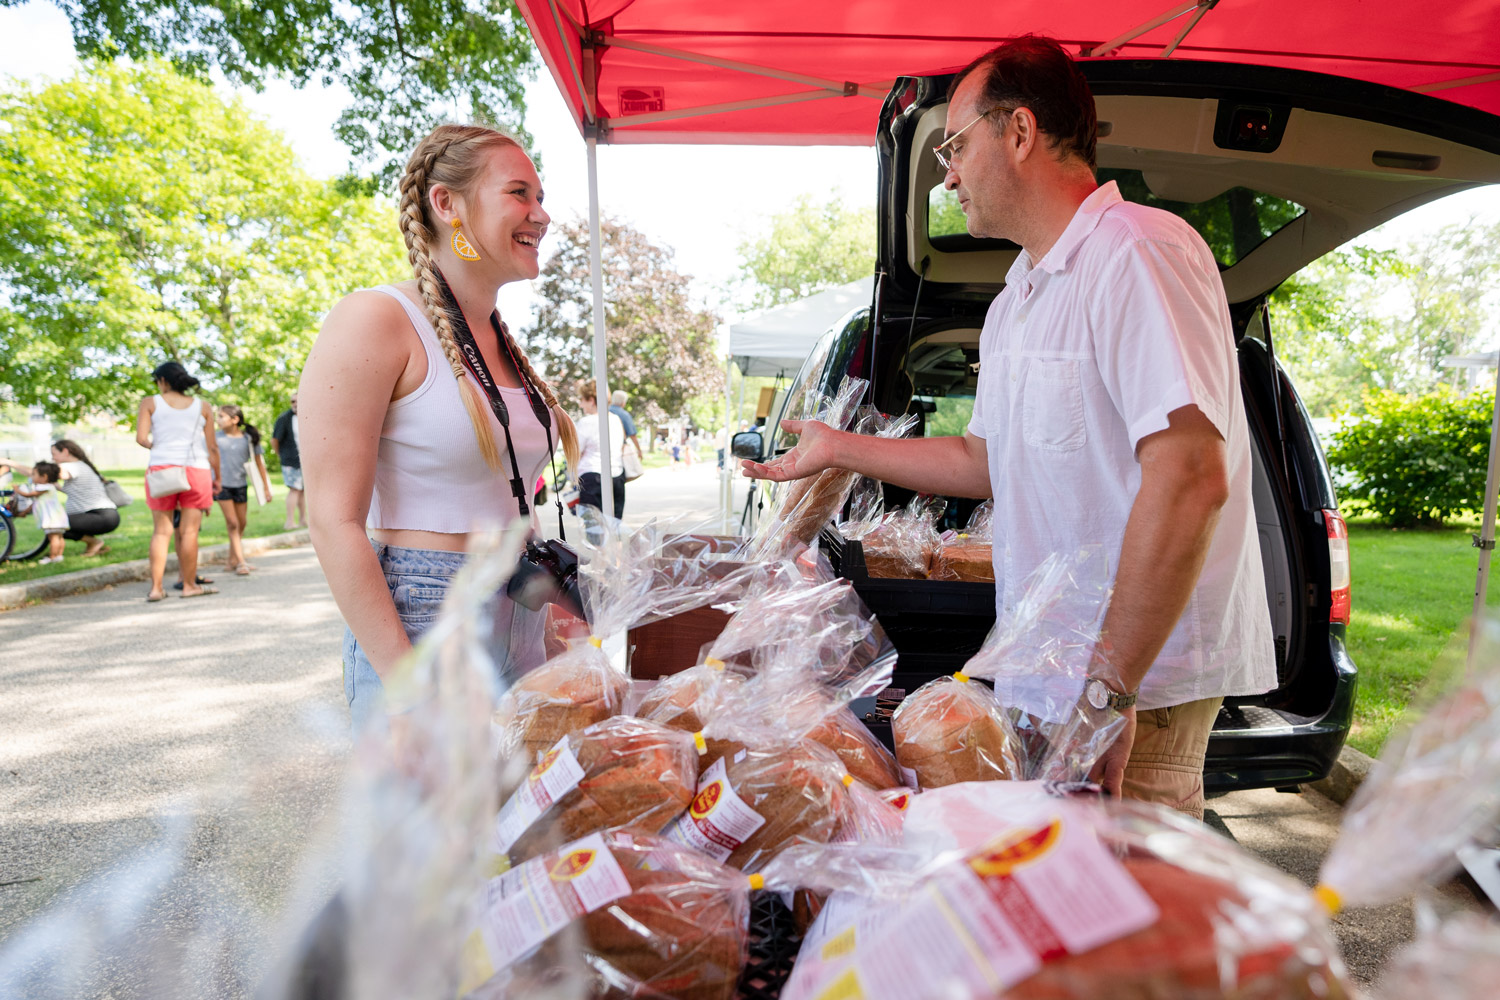 A female student stands at a table of bread at an outdoor farmer's market talking to an older man.